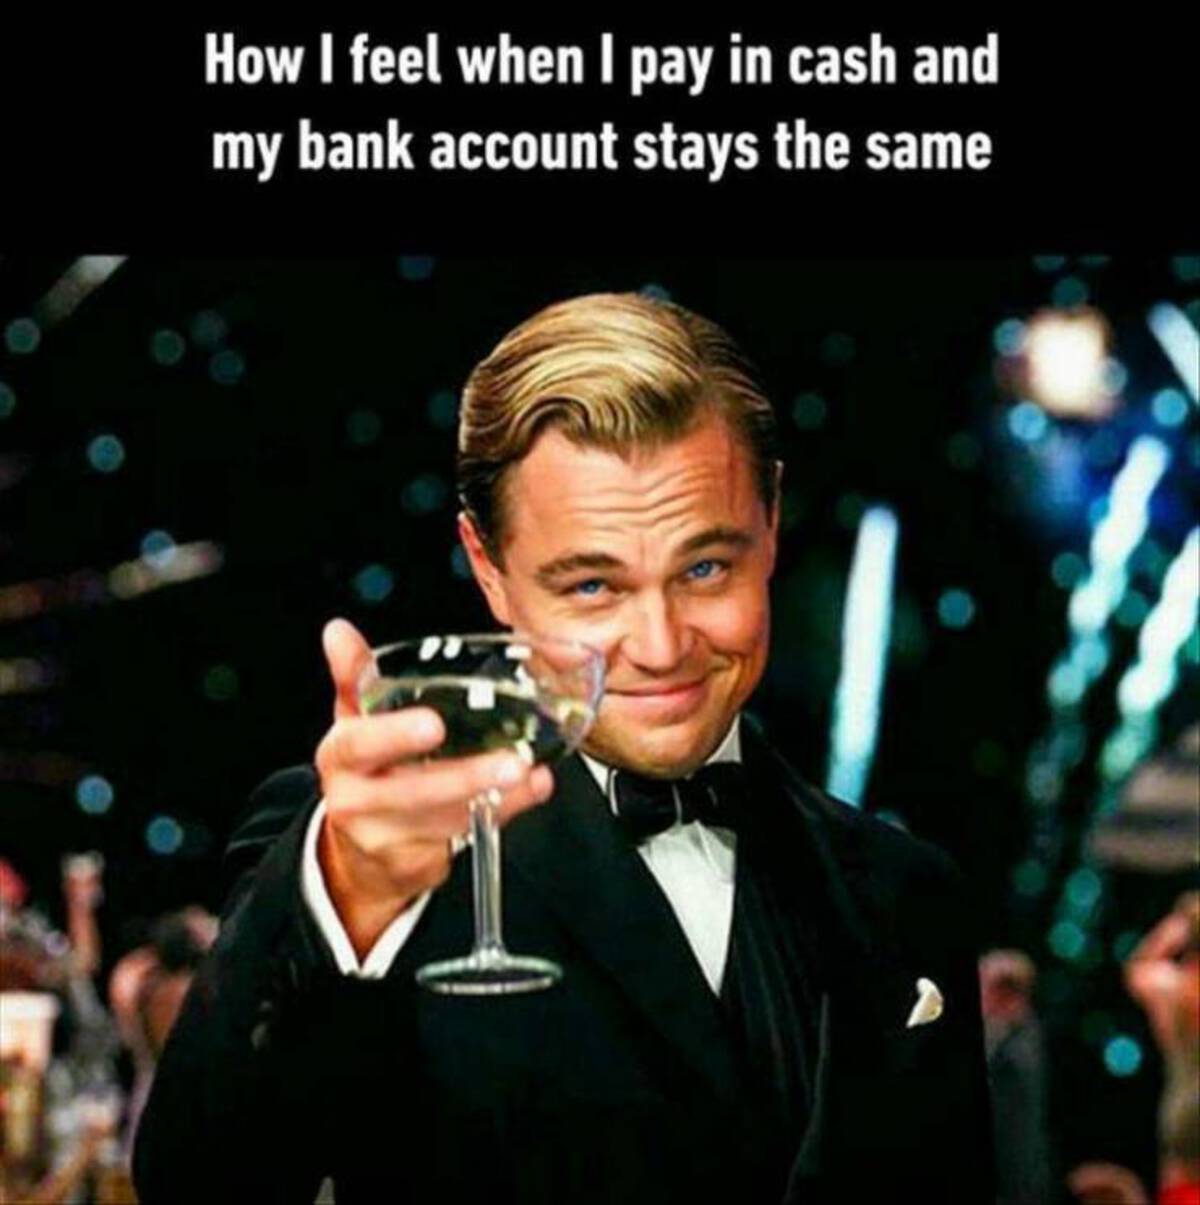 dicaprio celebration meme - How I feel when I pay in cash and my bank account stays the same